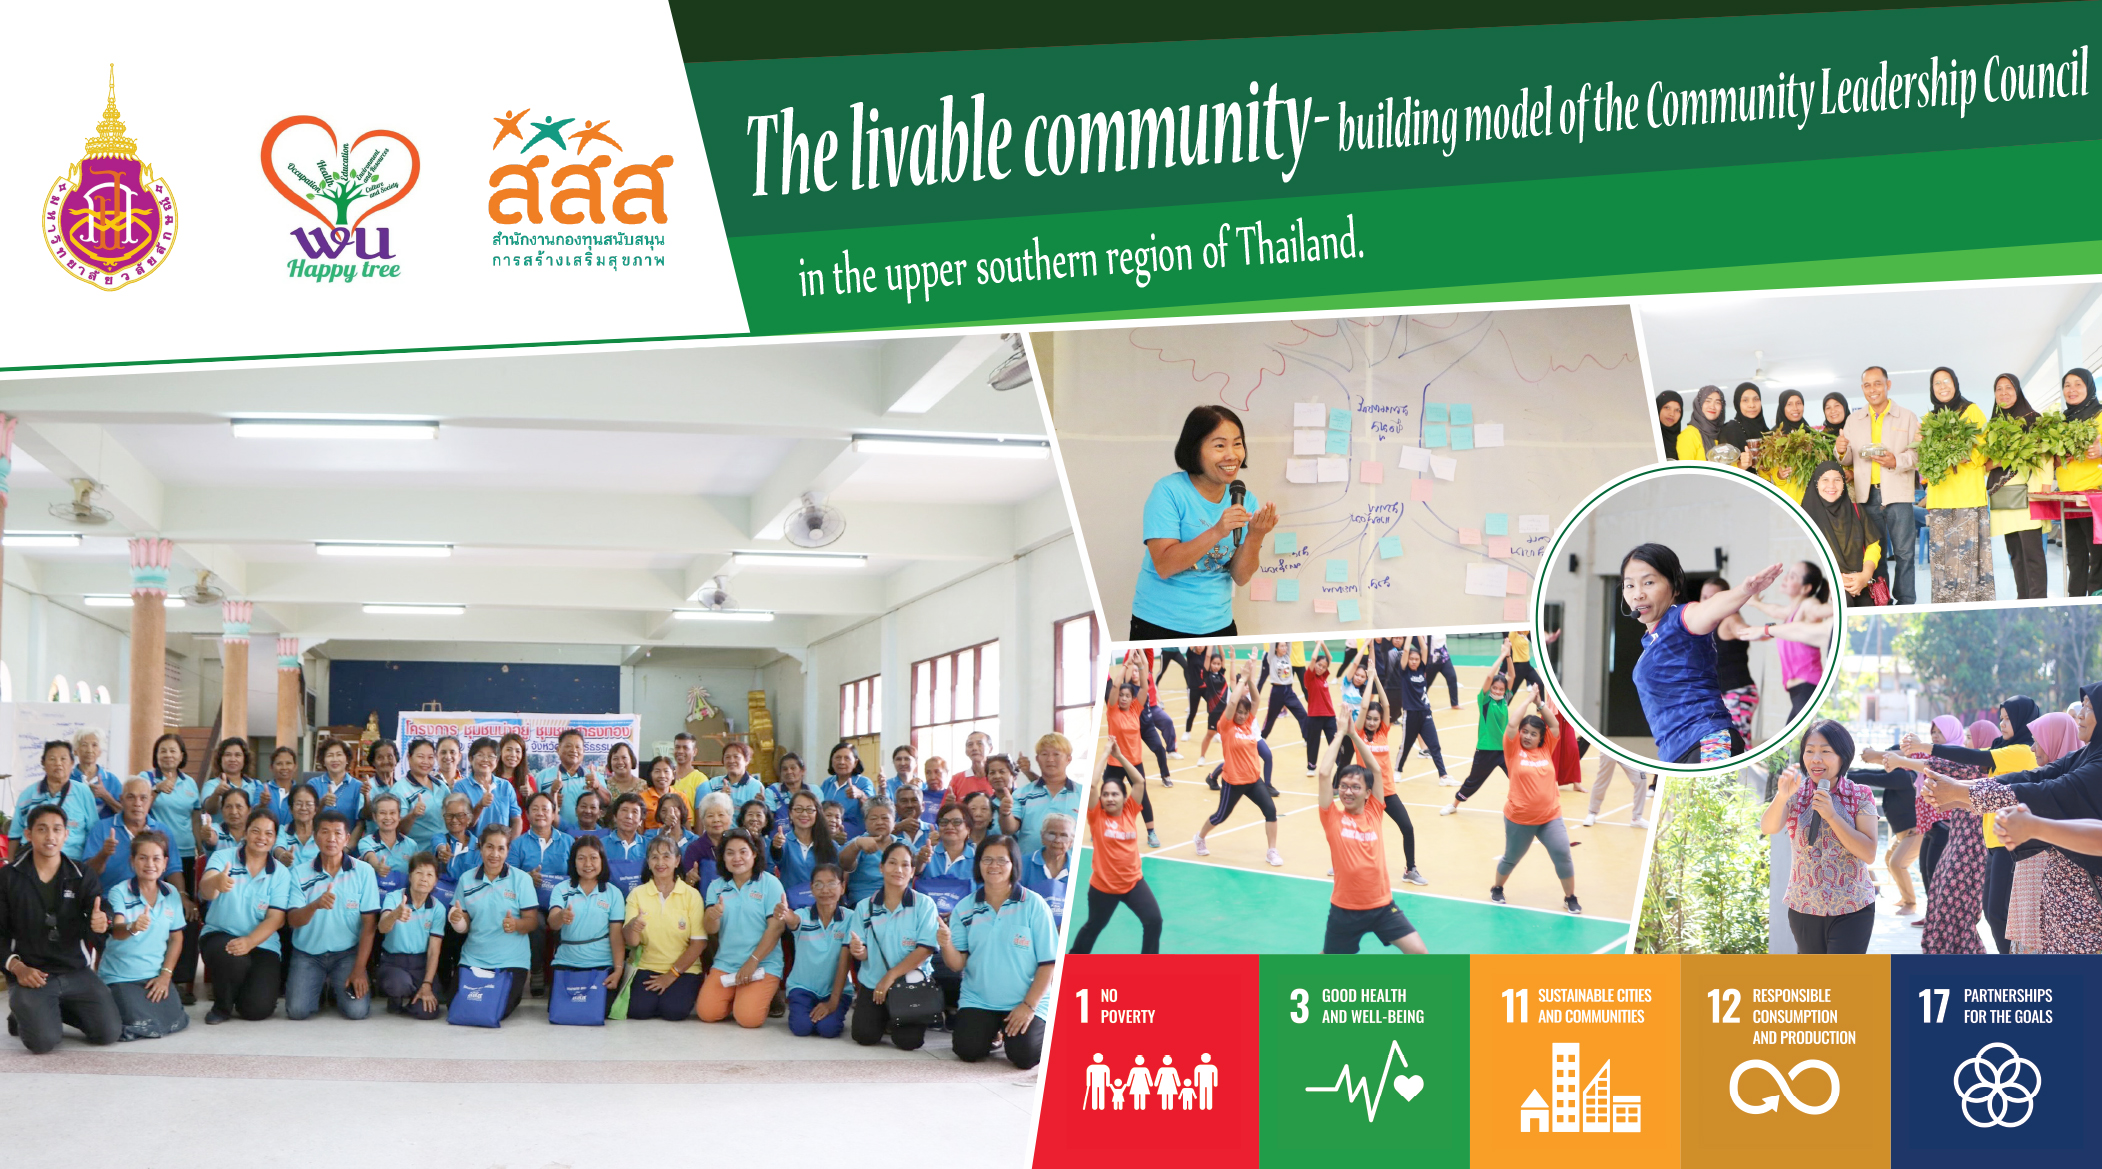 The livable community-building model of the Community Leadership Council in the upper southern region of Thailand.